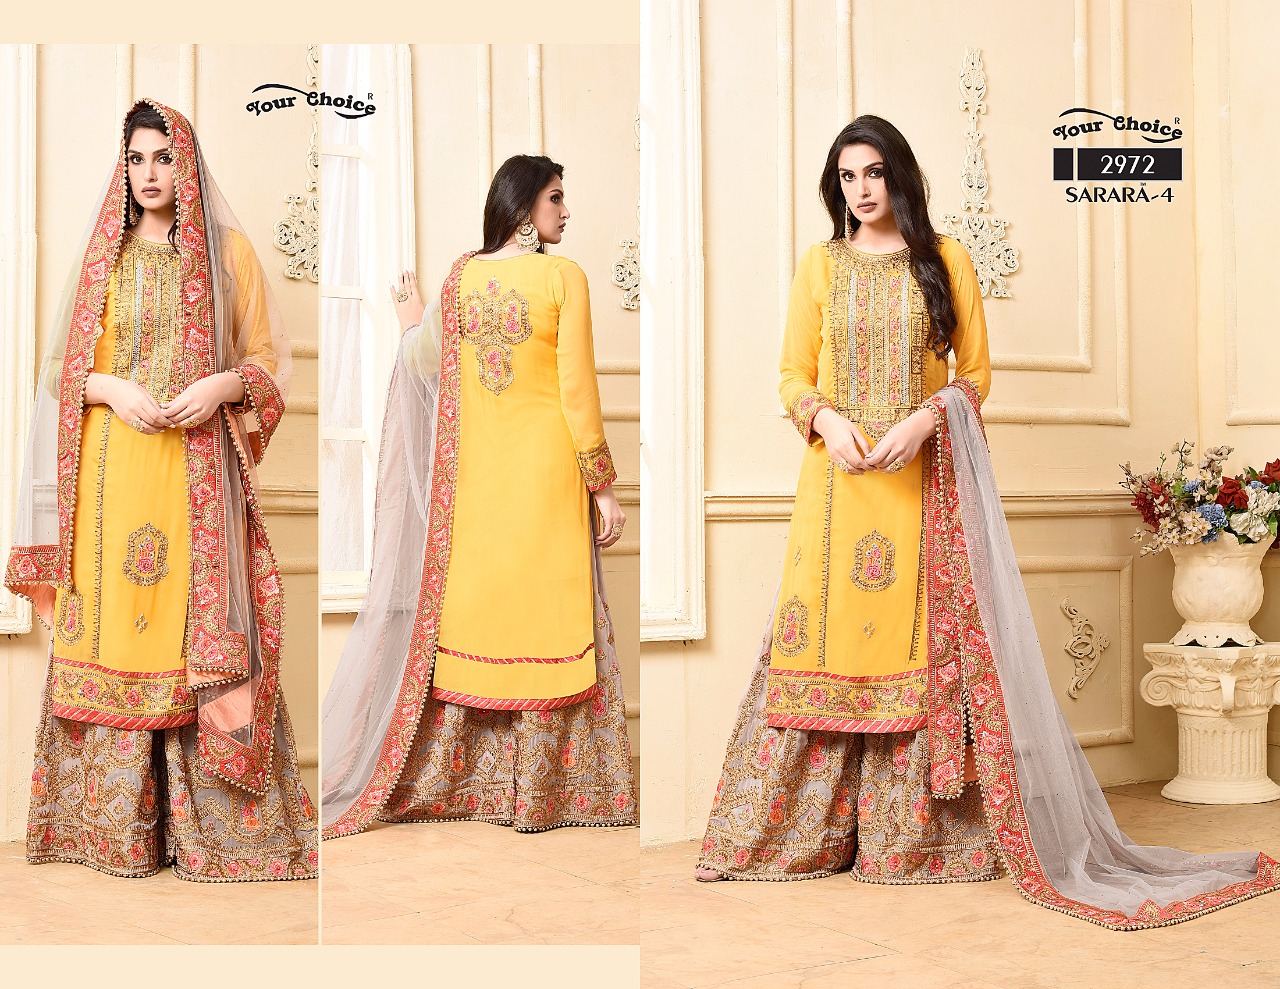 Your choice Presents sarara 4 traditional wear heavy collection of salwar kameez